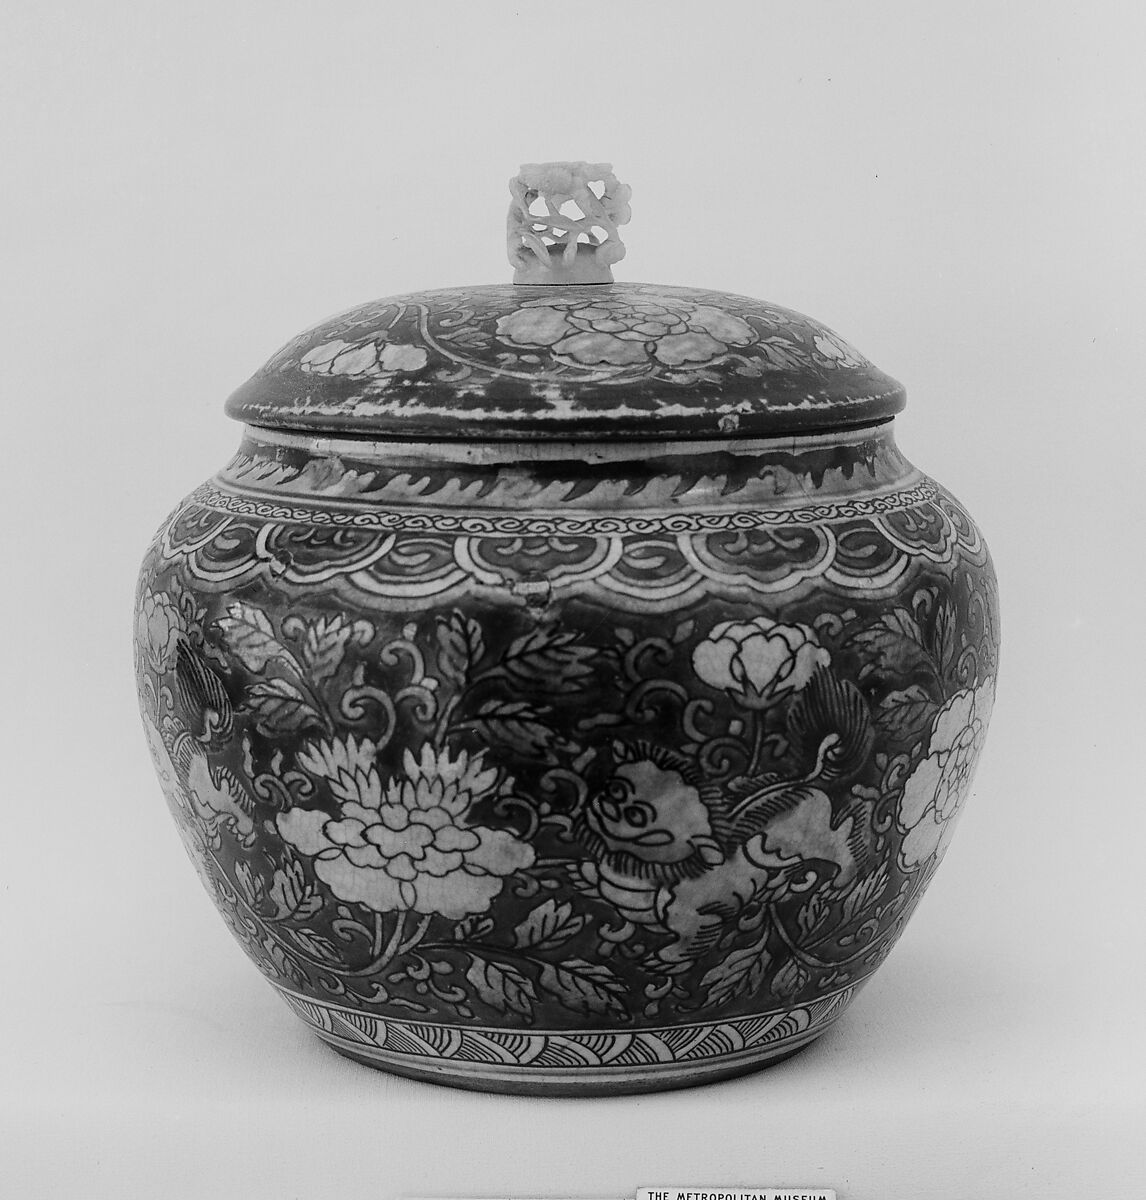 Covered Jar, Clay covered with a crackled glaze and decorated with polychrome enamels (Hizen ware, Kutani type), Japan 